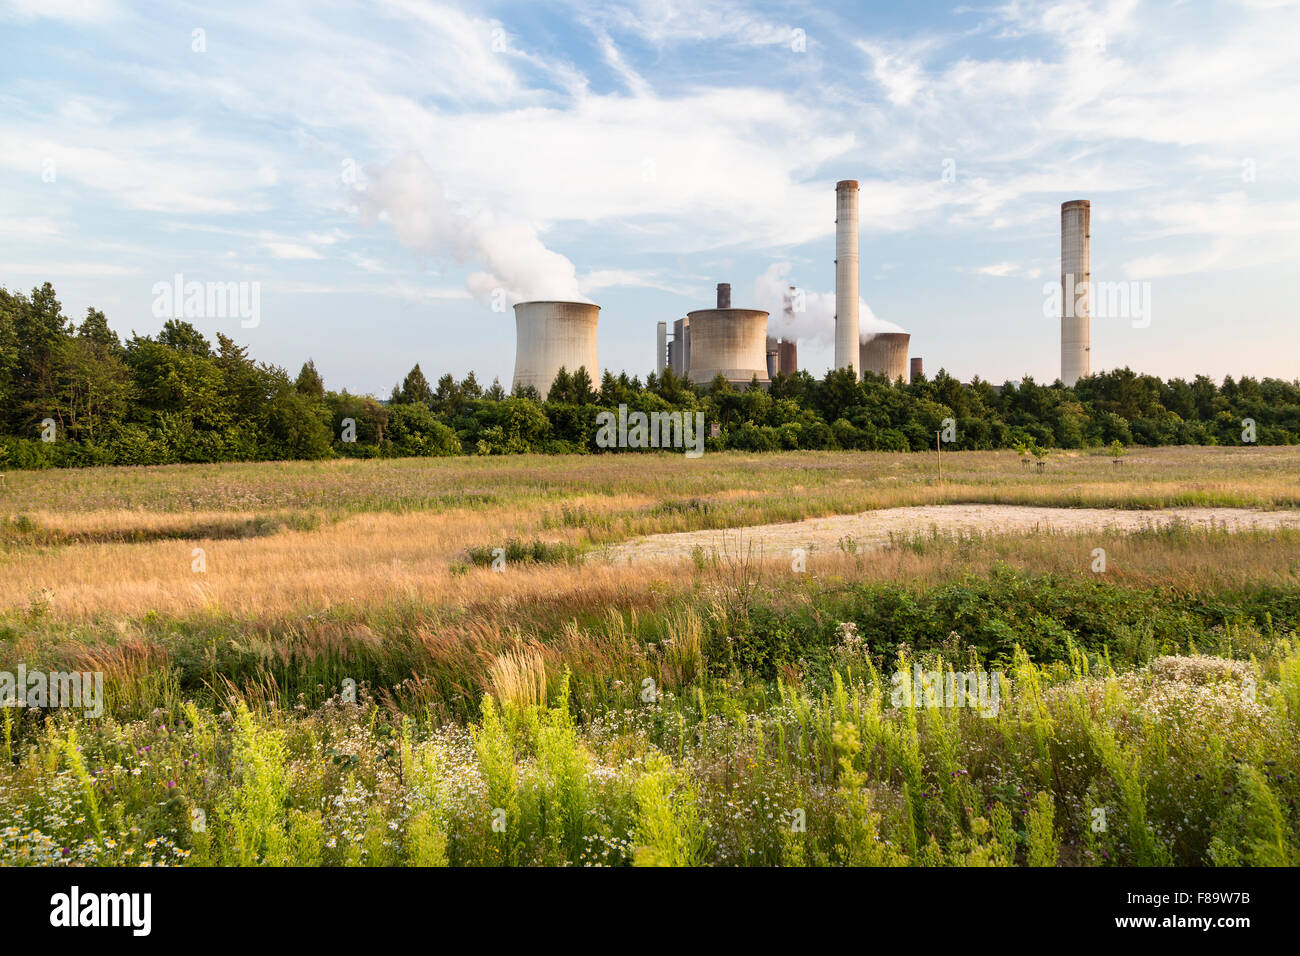 A large coal-fired power station behind some trees and a green field. Stock Photo